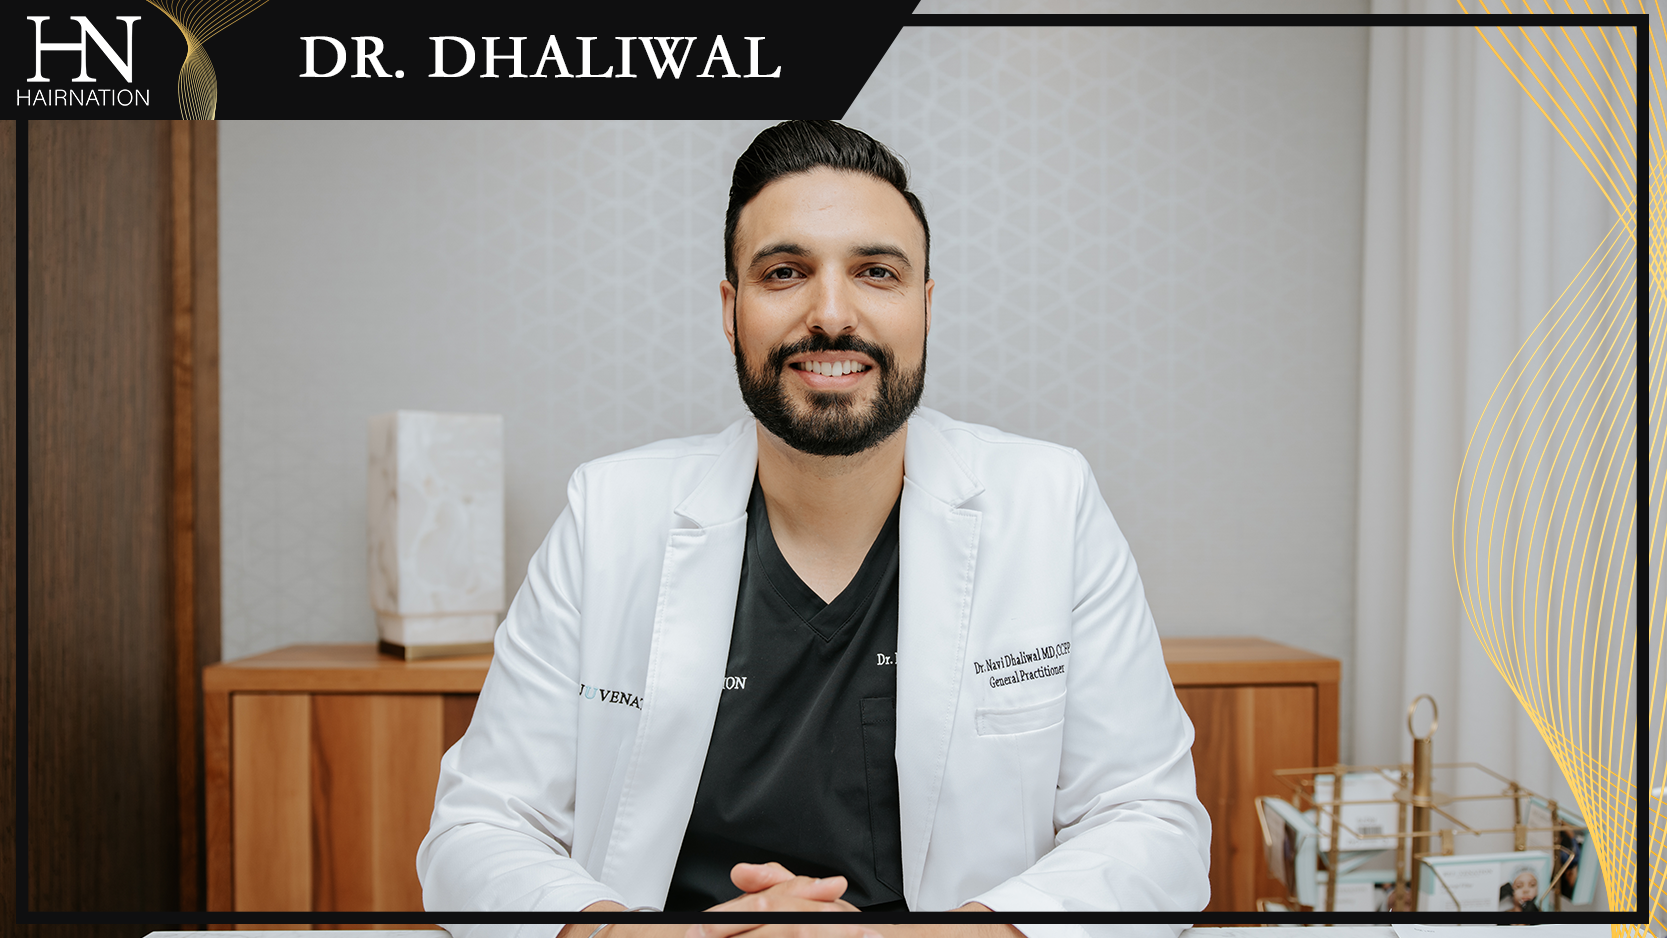 About Dr. Dhaliwal